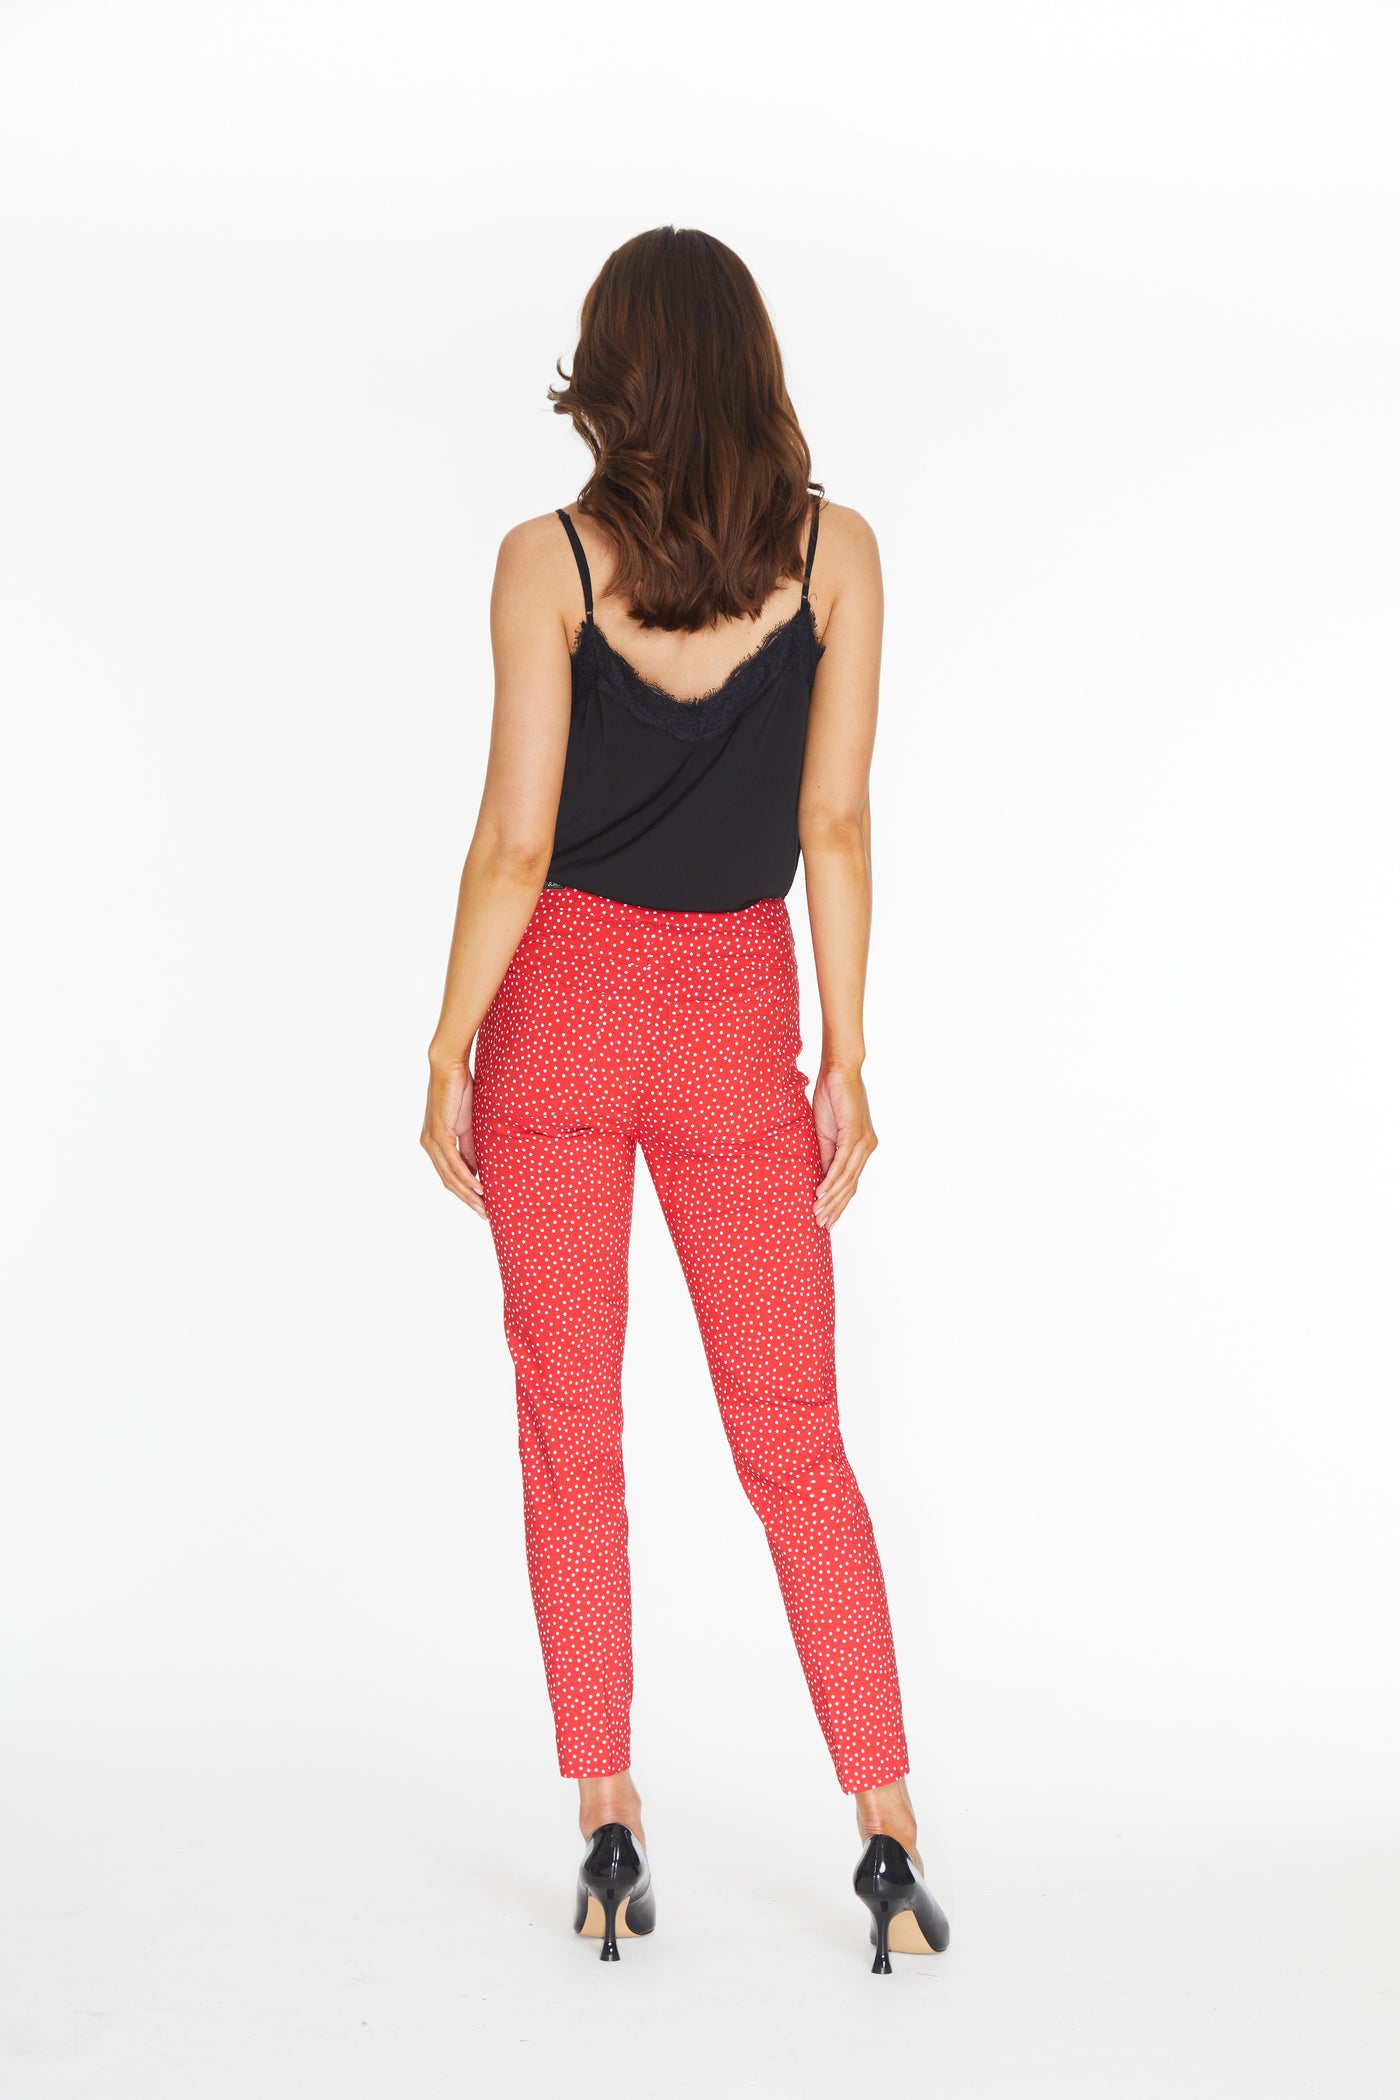 Pull-On Ankle Pant - Women's - Red Print